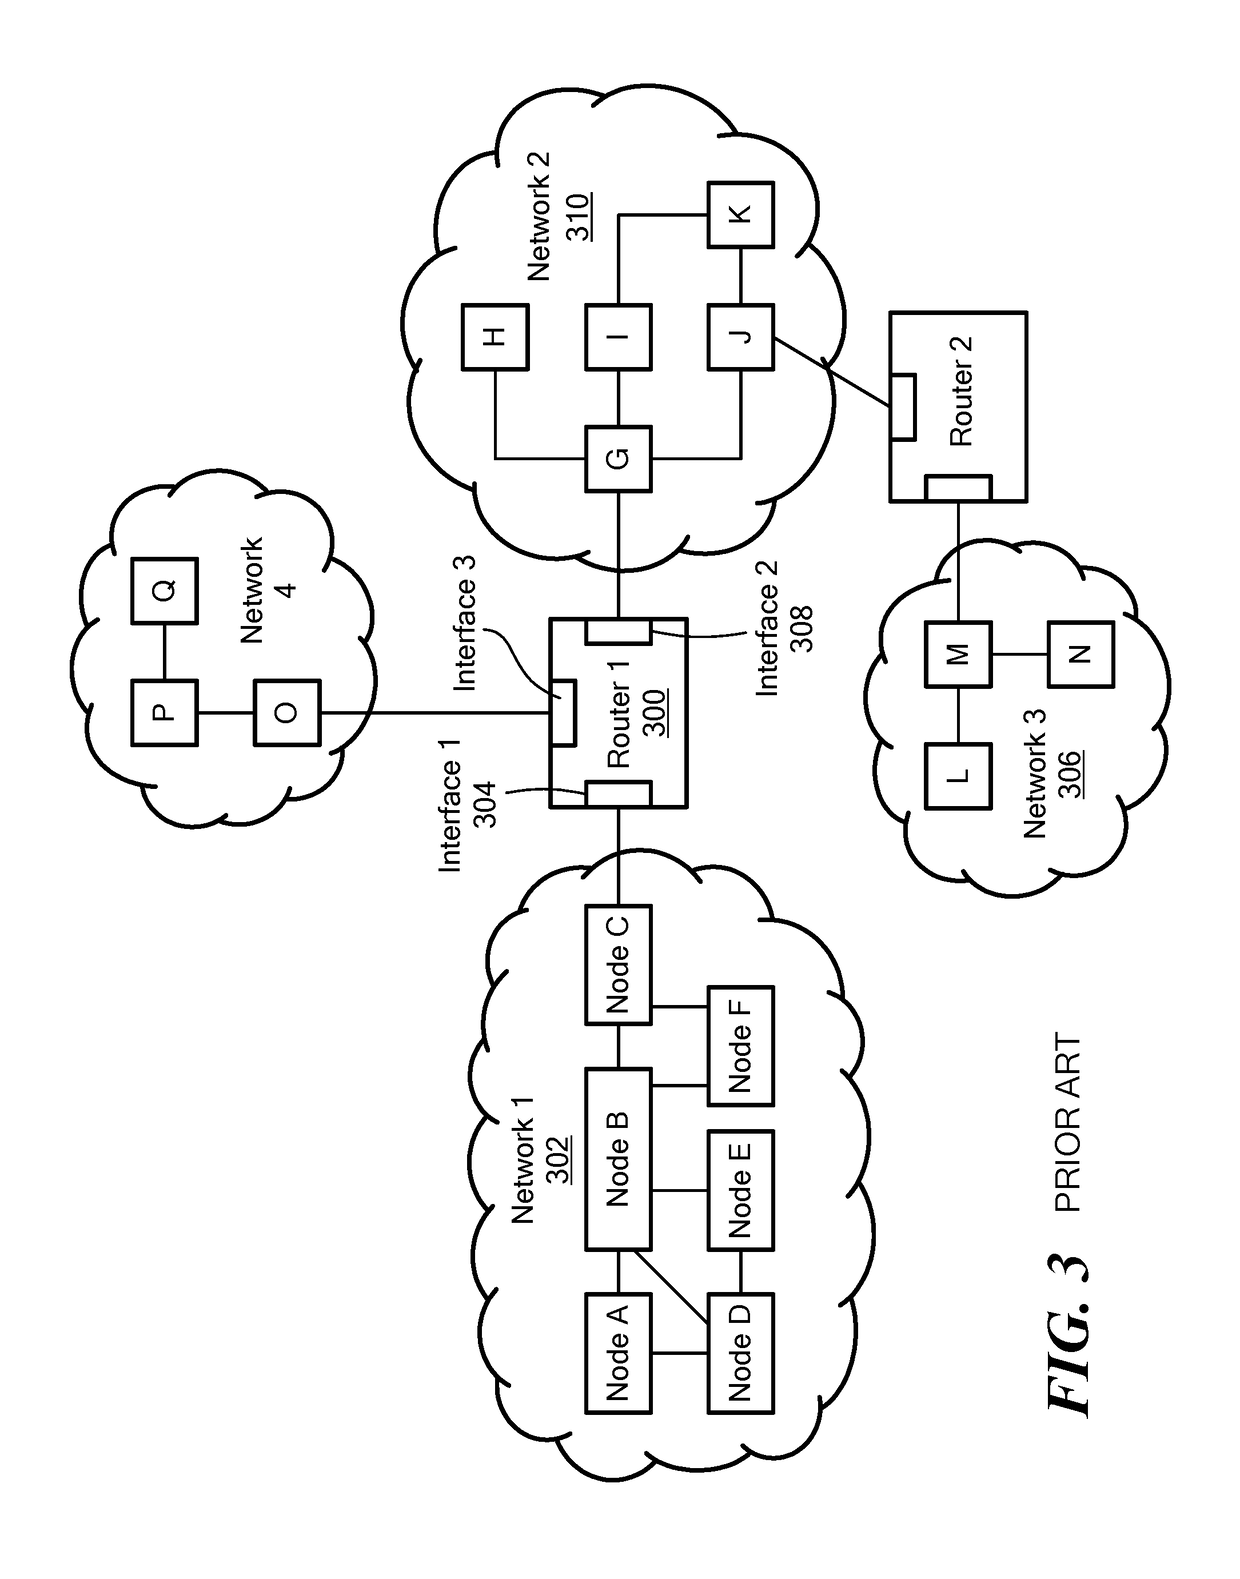 Router with optimized statistical functionality